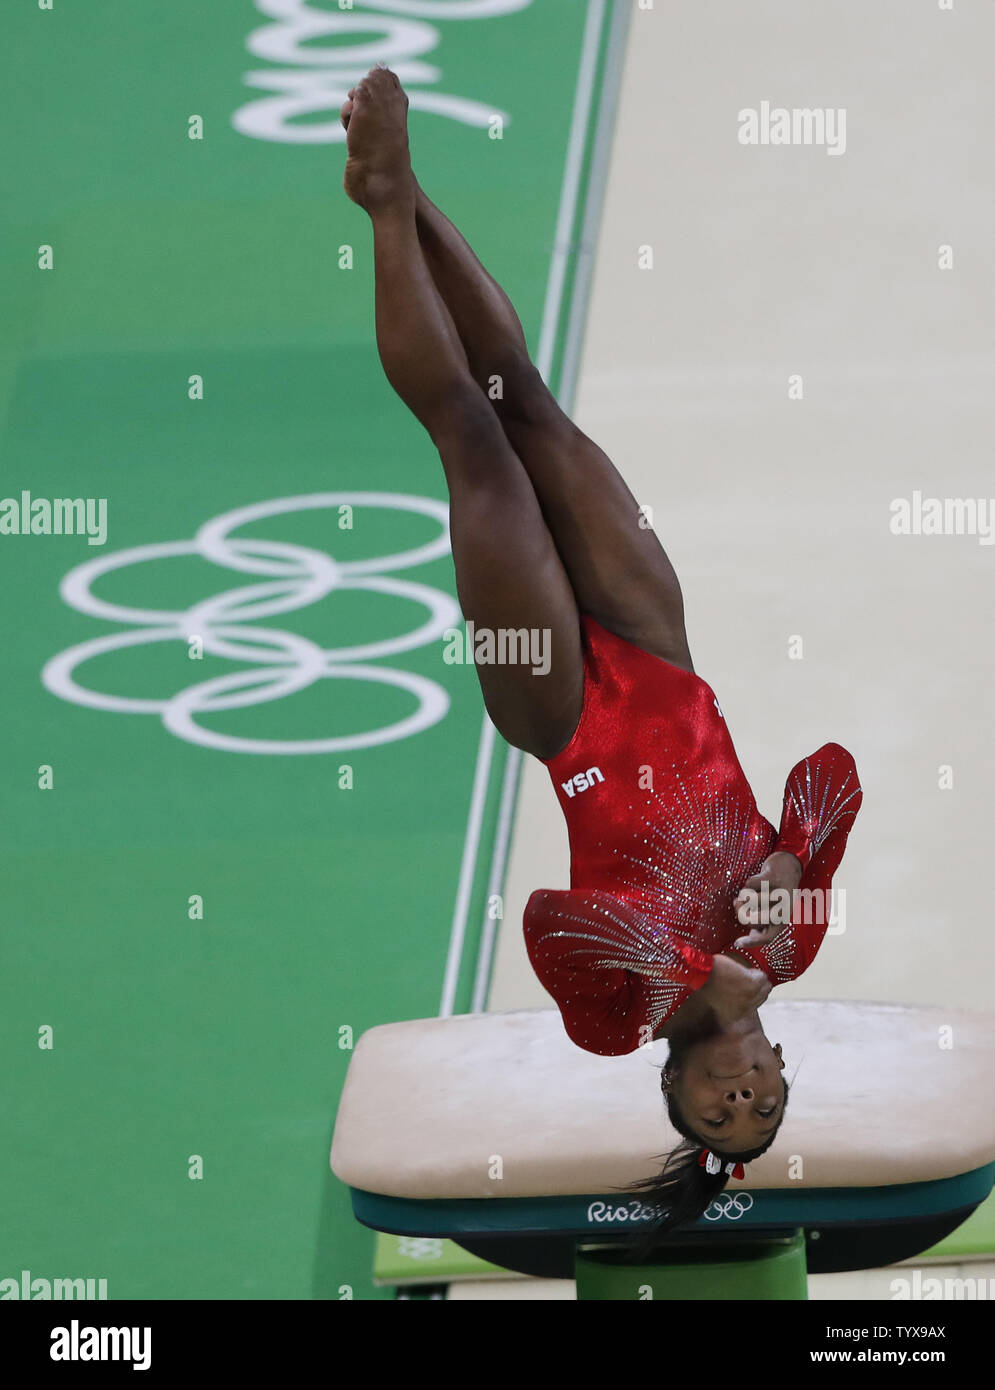 Usa S Simone Biles Competes In The Vault At Gymnastics At The 16 Rio Summer Olympics In Rio De Janeiro Brazil August 14 16 Biles Took The Gold Medal With A Score Of